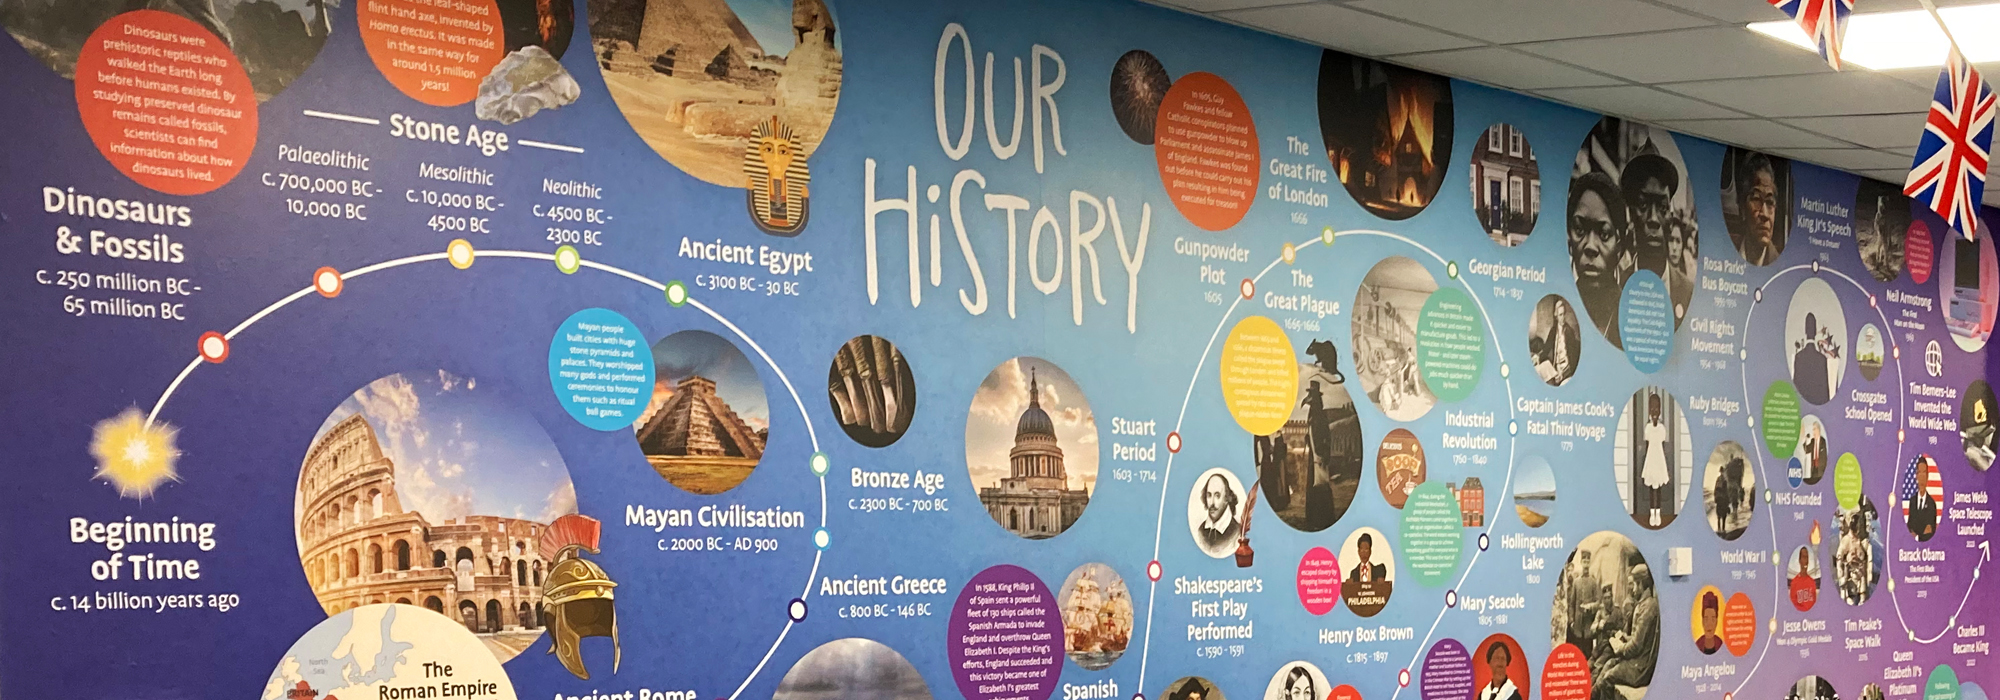 An image showing an impactful history timeline running floor to ceiling on a wall at Crossgates Primary School.